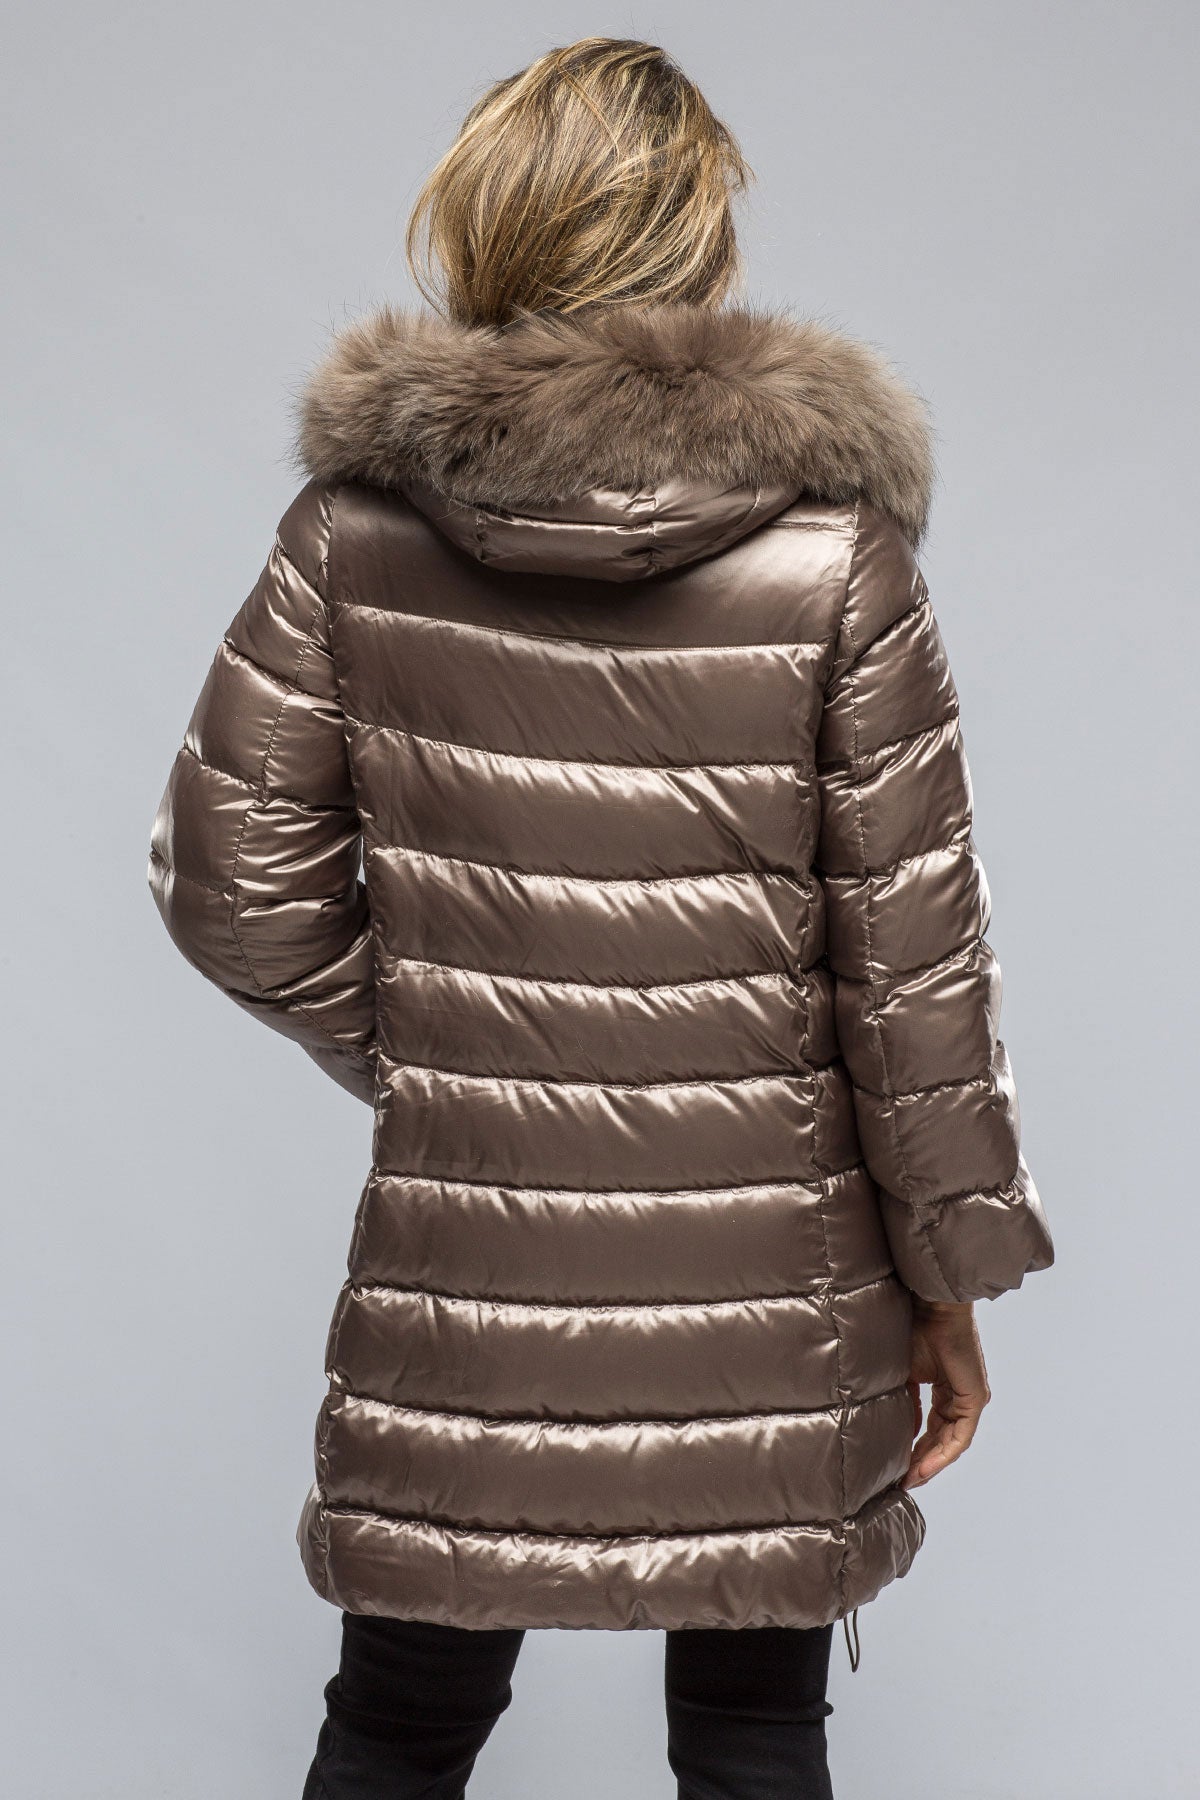 Claire Metallic Long Puffer | Samples - Ladies - Outerwear - Cloth | Gimo's